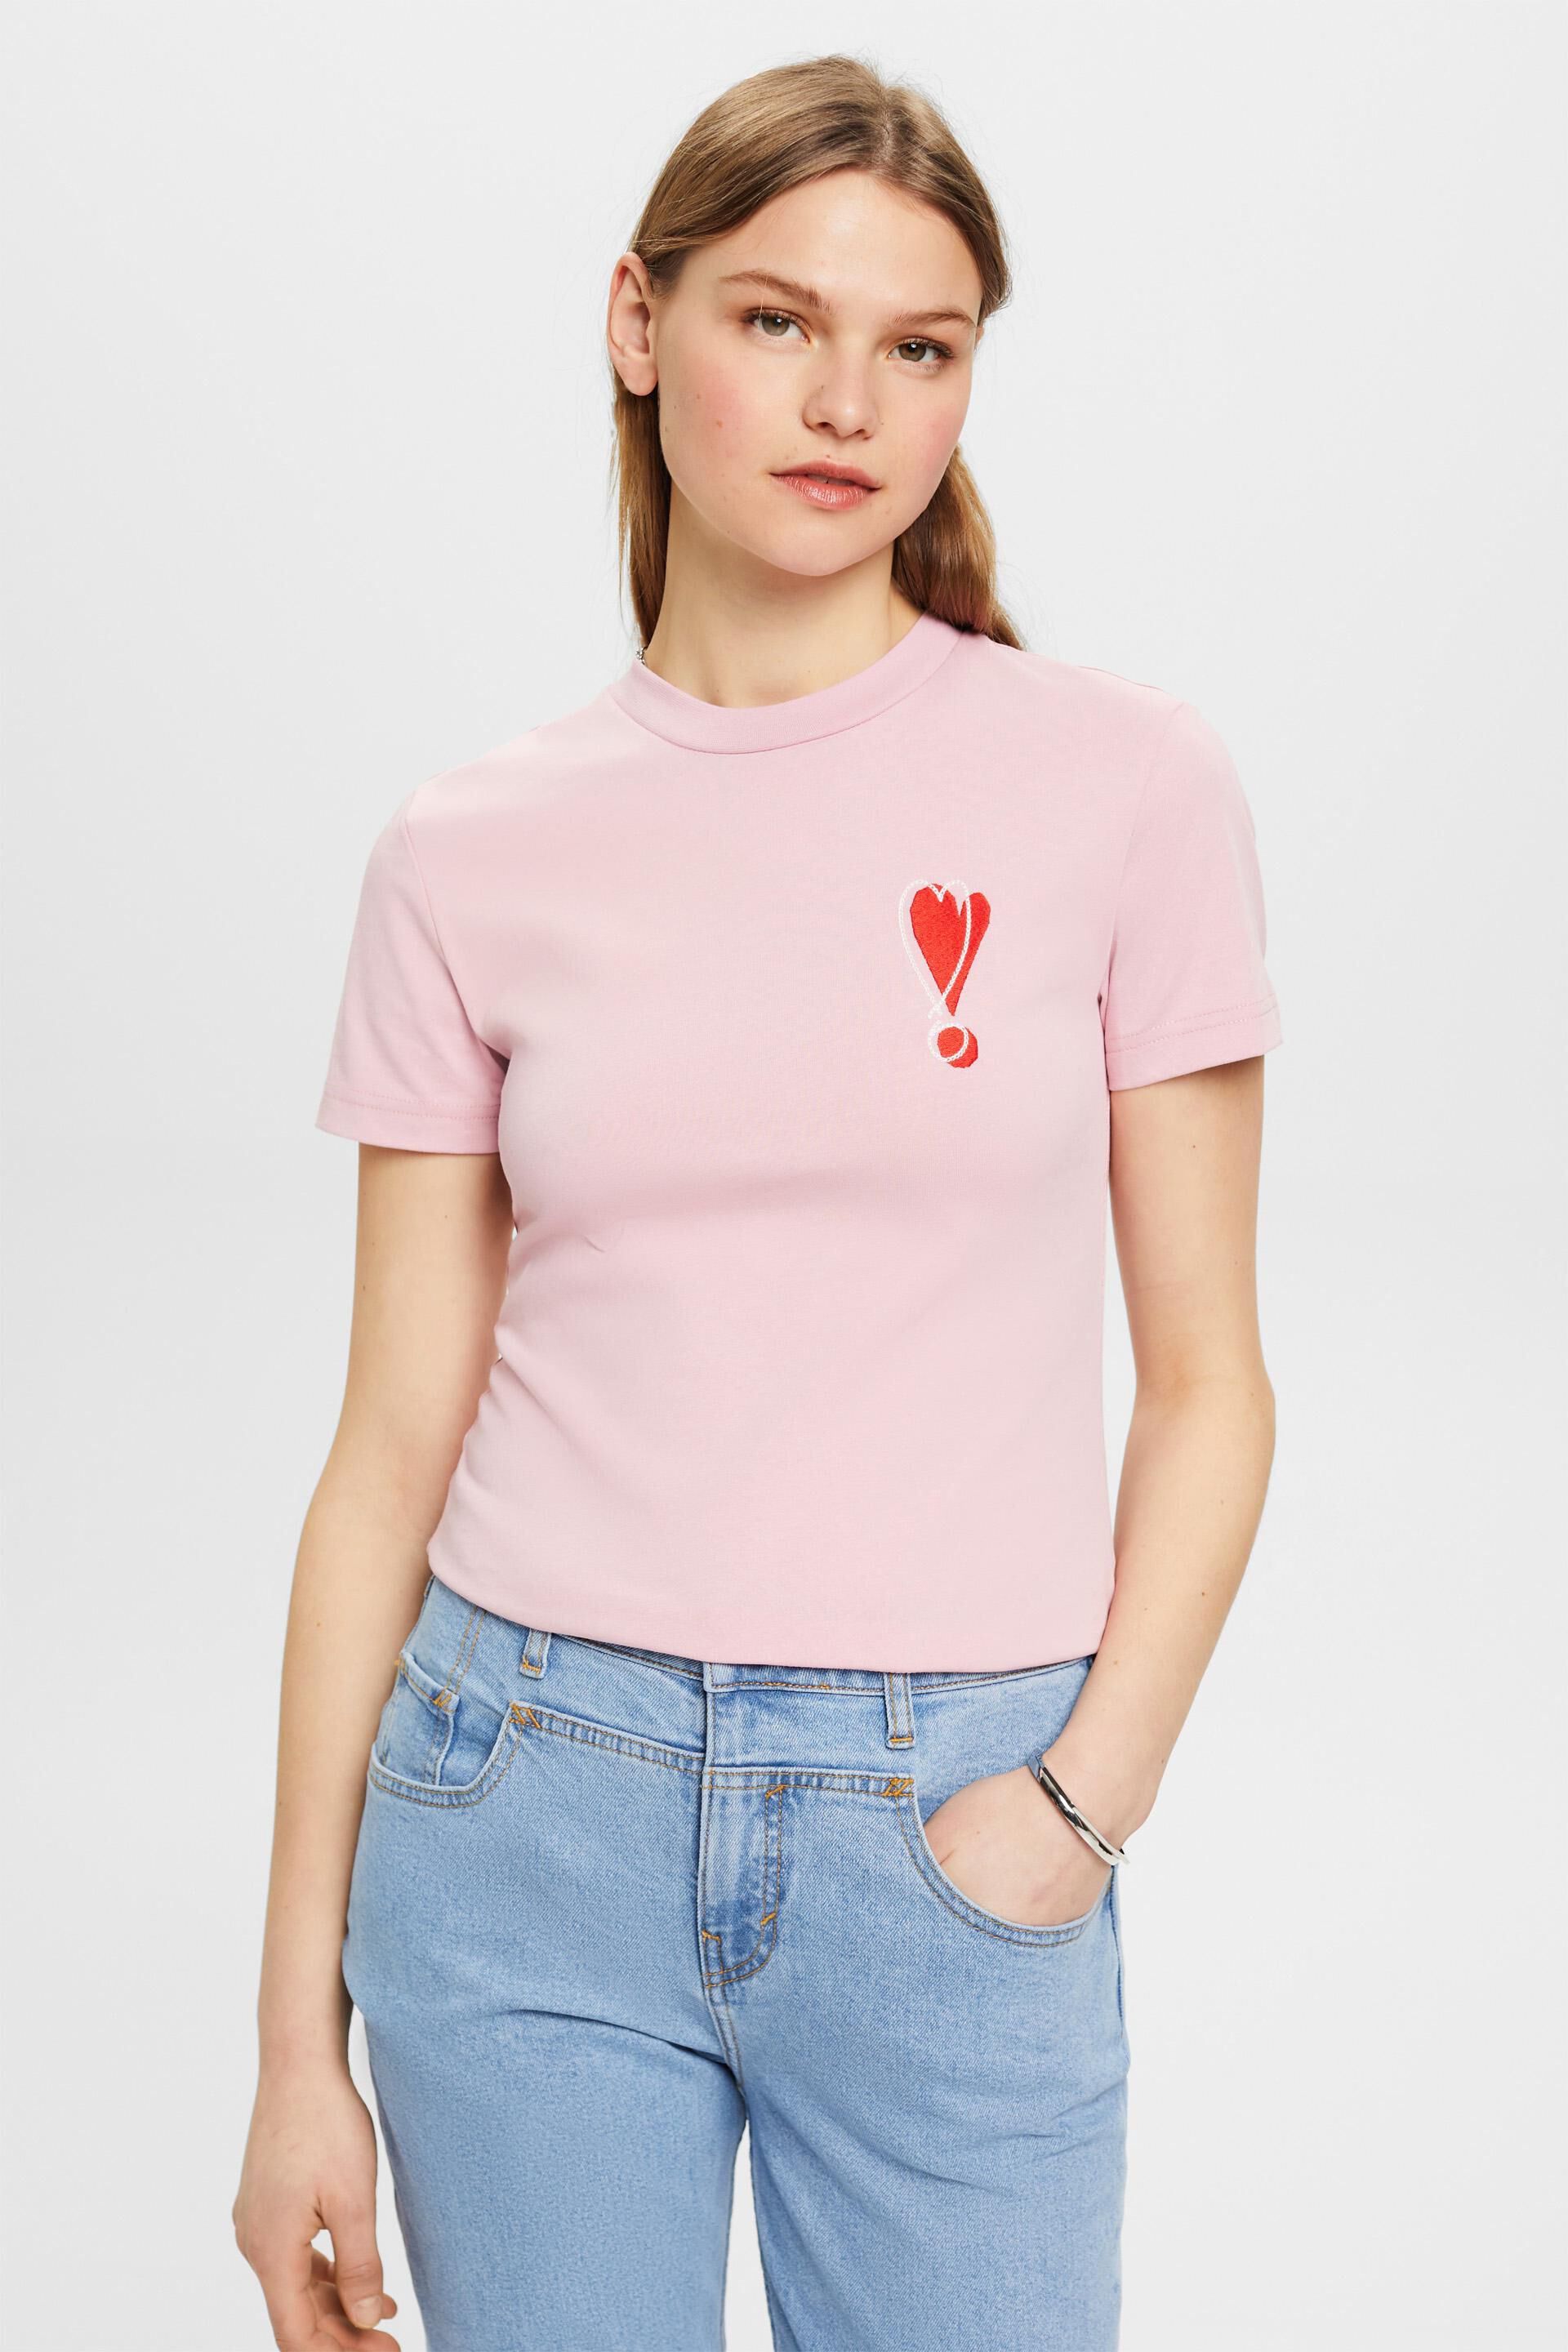 Esprit T-shirt heart Cotton motif embroidered with